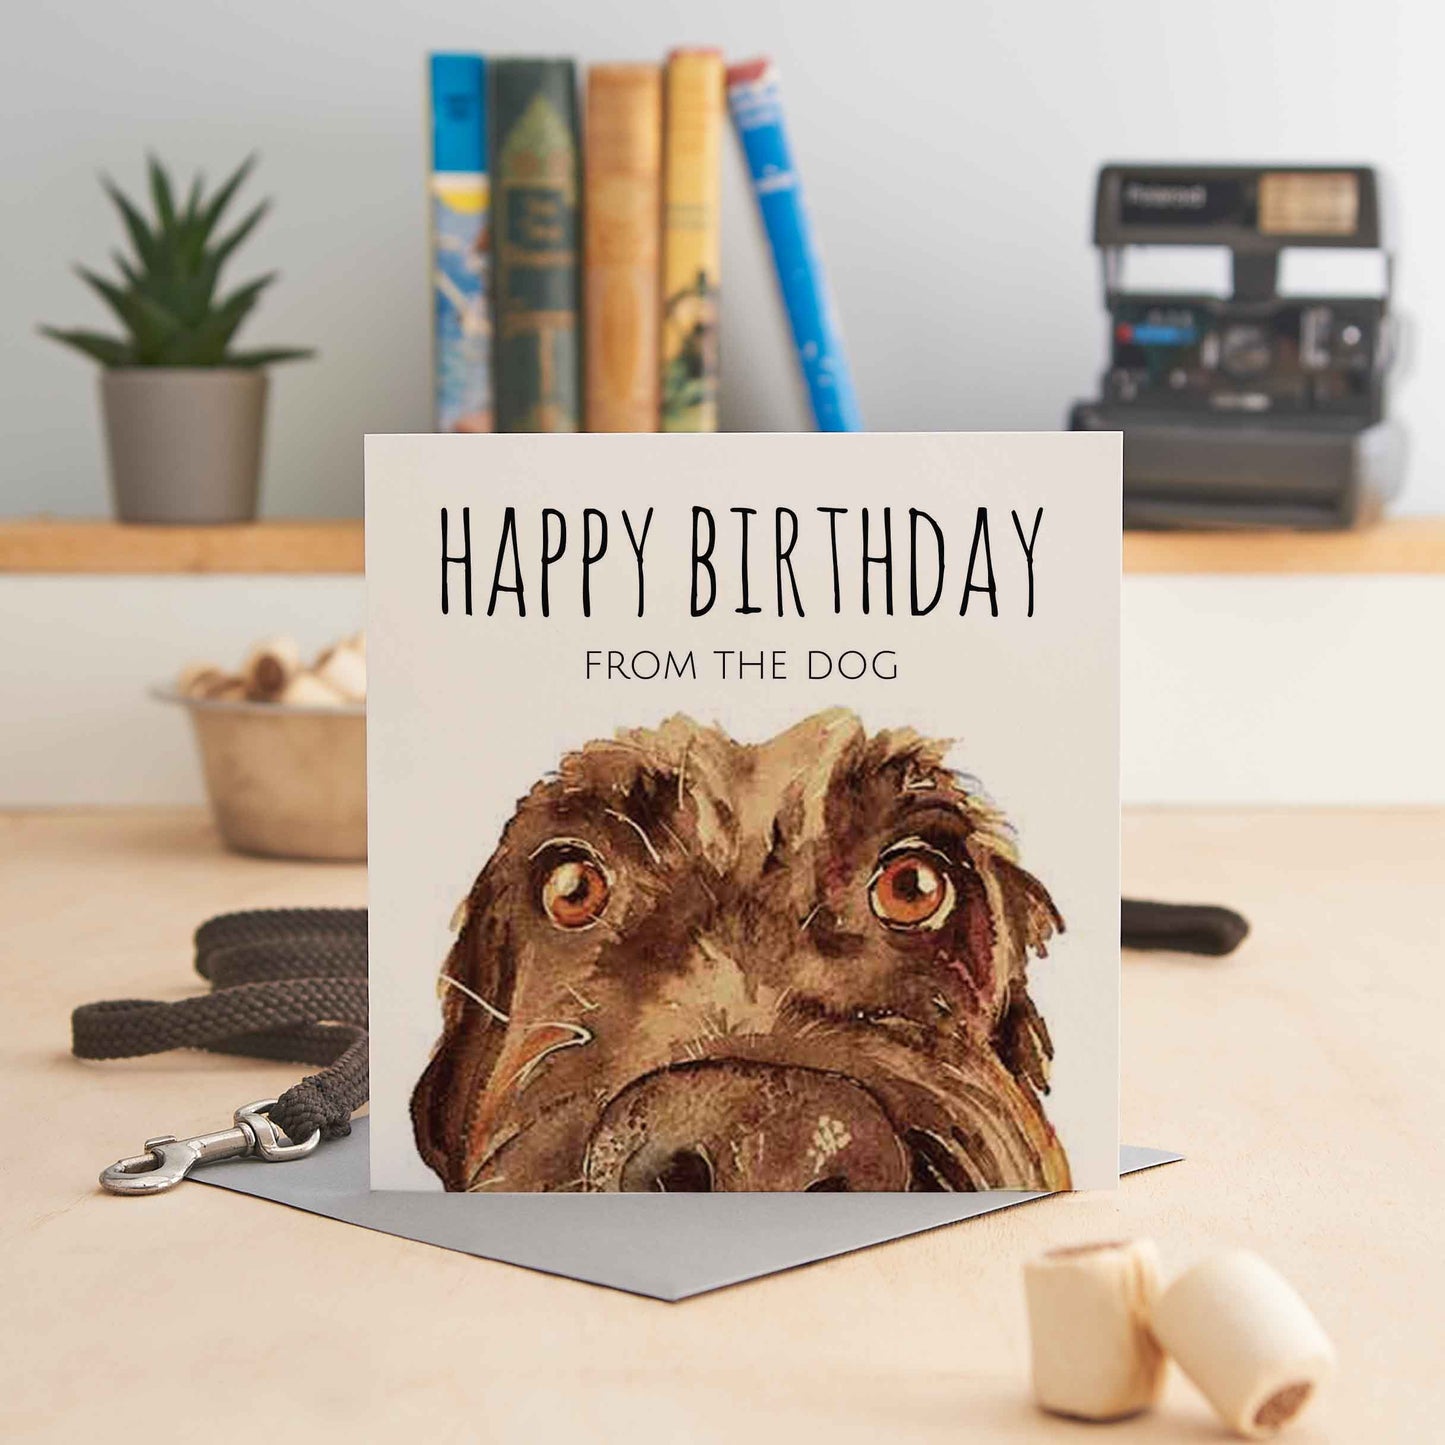 Happy Birthday From the Dog - Greeting Card